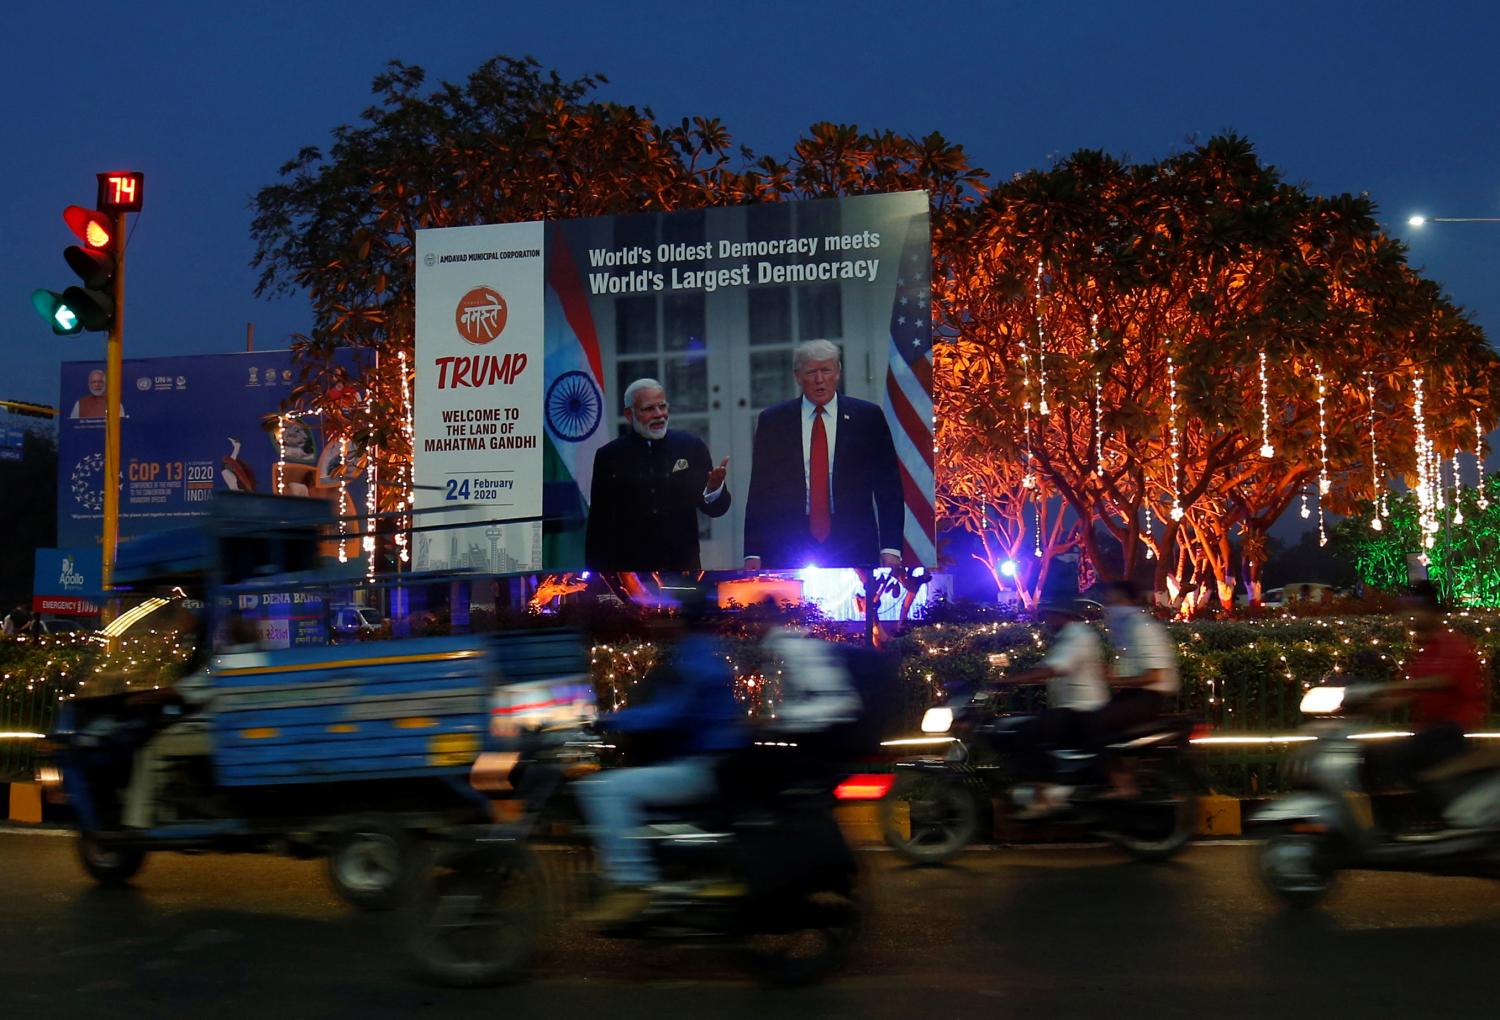 People ride their motorbikes past a hoarding with the images of India's Prime Minister Narendra Modi and U.S. President Donald Trump installed next to decorated trees alongside a road ahead of Trump's visit, in Ahmedabad, India, February 20, 2020. REUTERS/Amit Dave